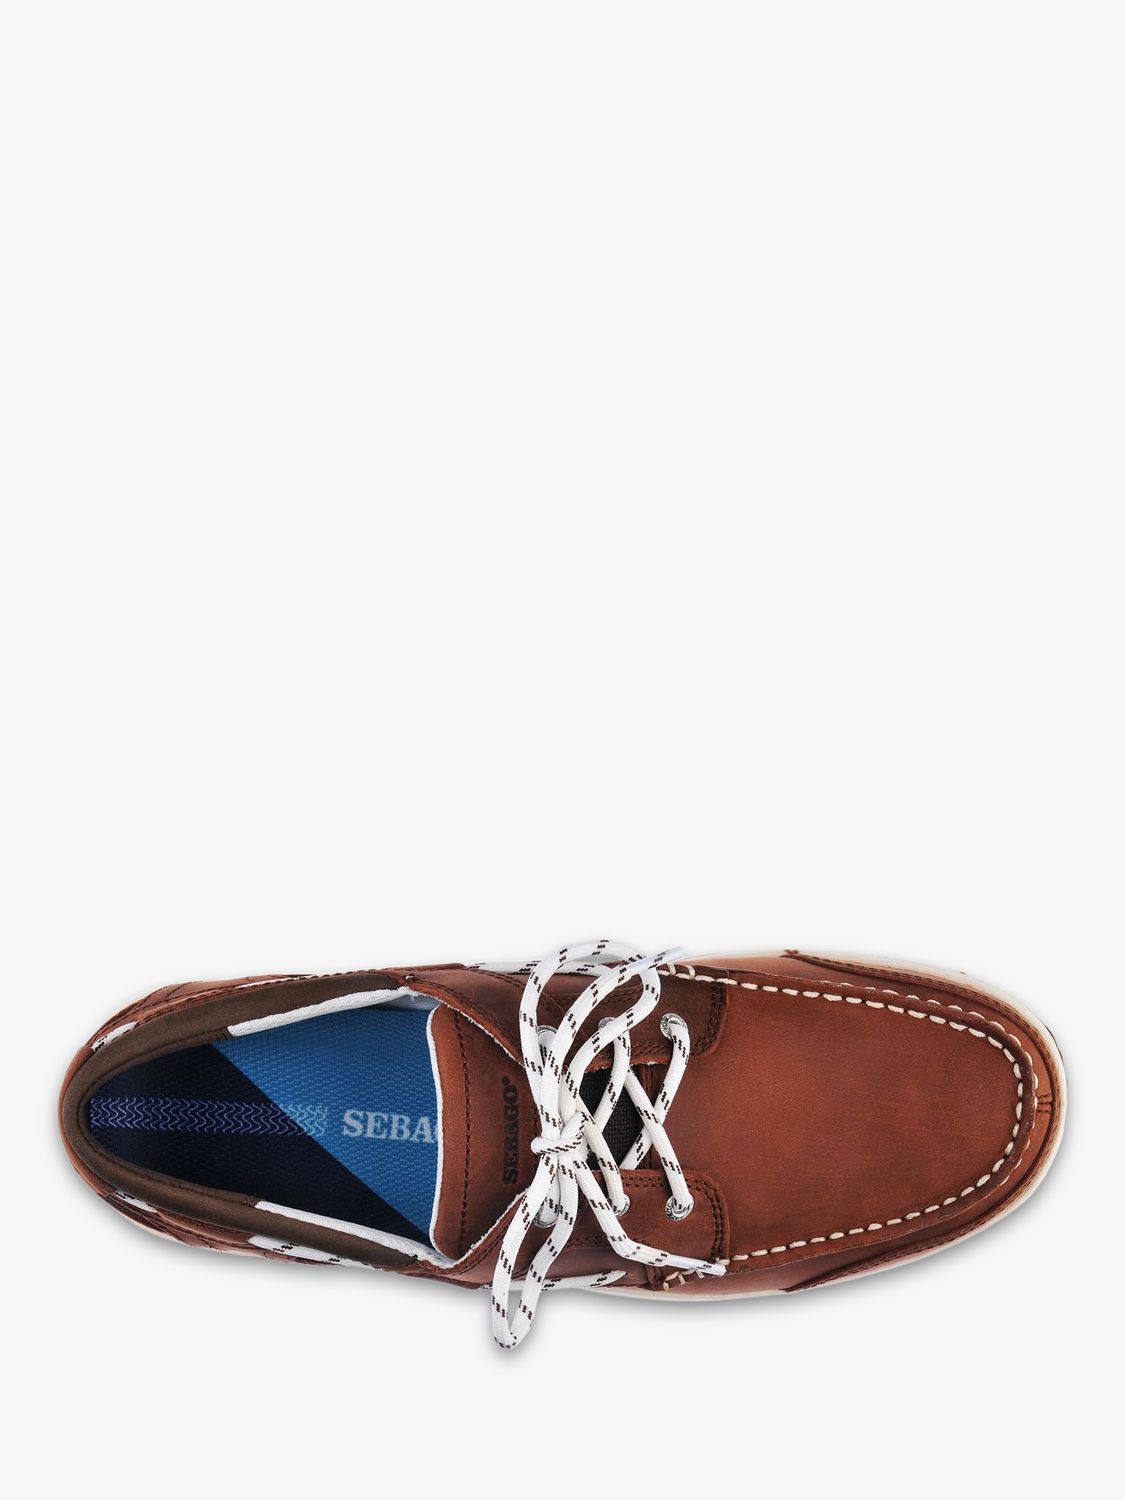 lv boat - Loafer & Boat Shoes Best Prices and Online Promos